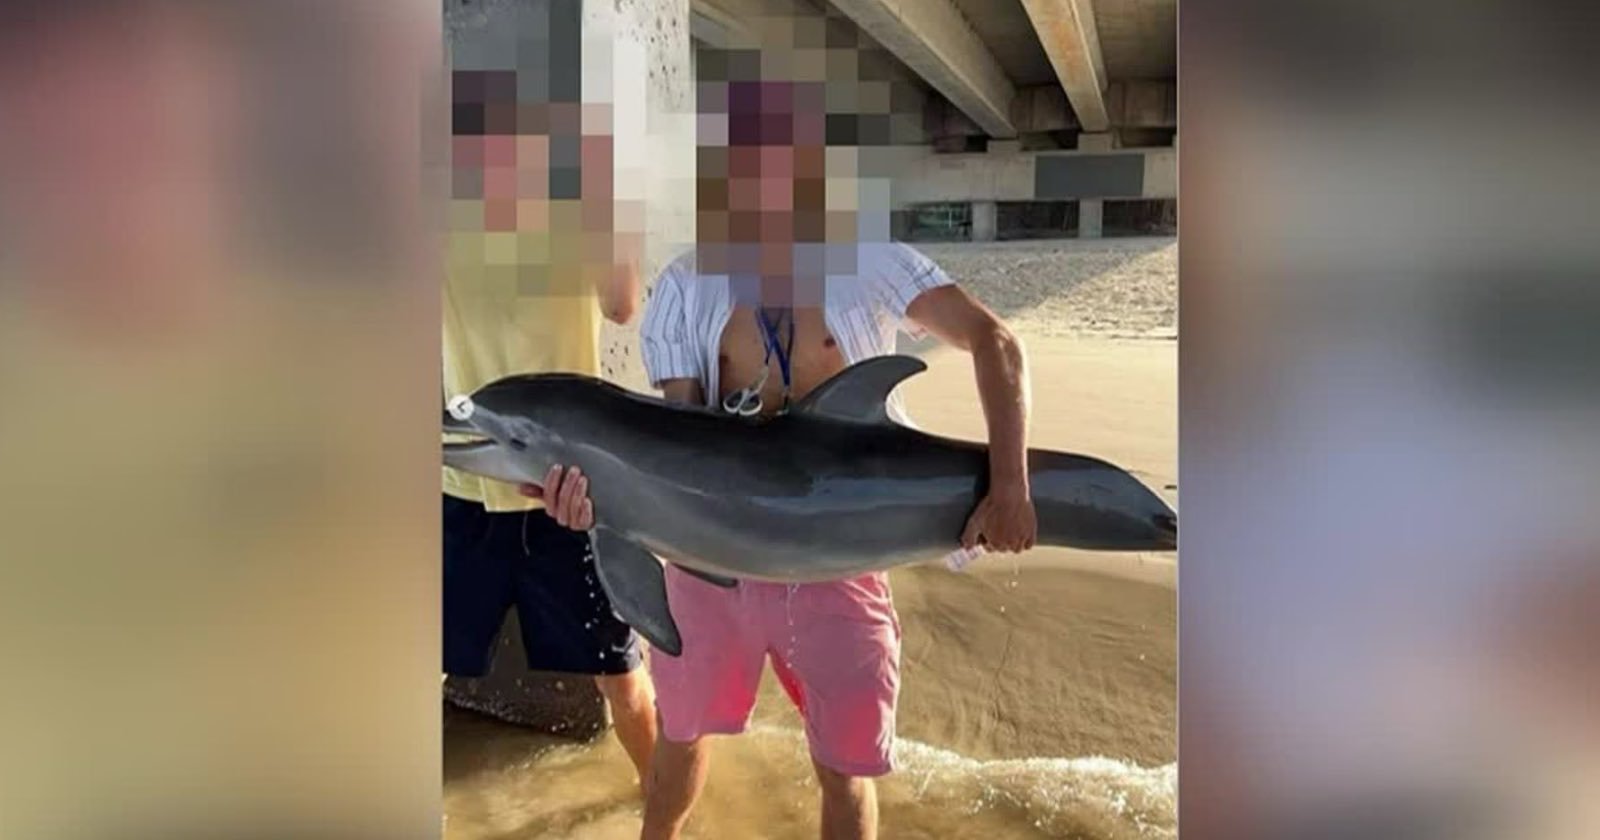 Baby Dolphin Believed to Have Died After Man Held It For Instagram Photo